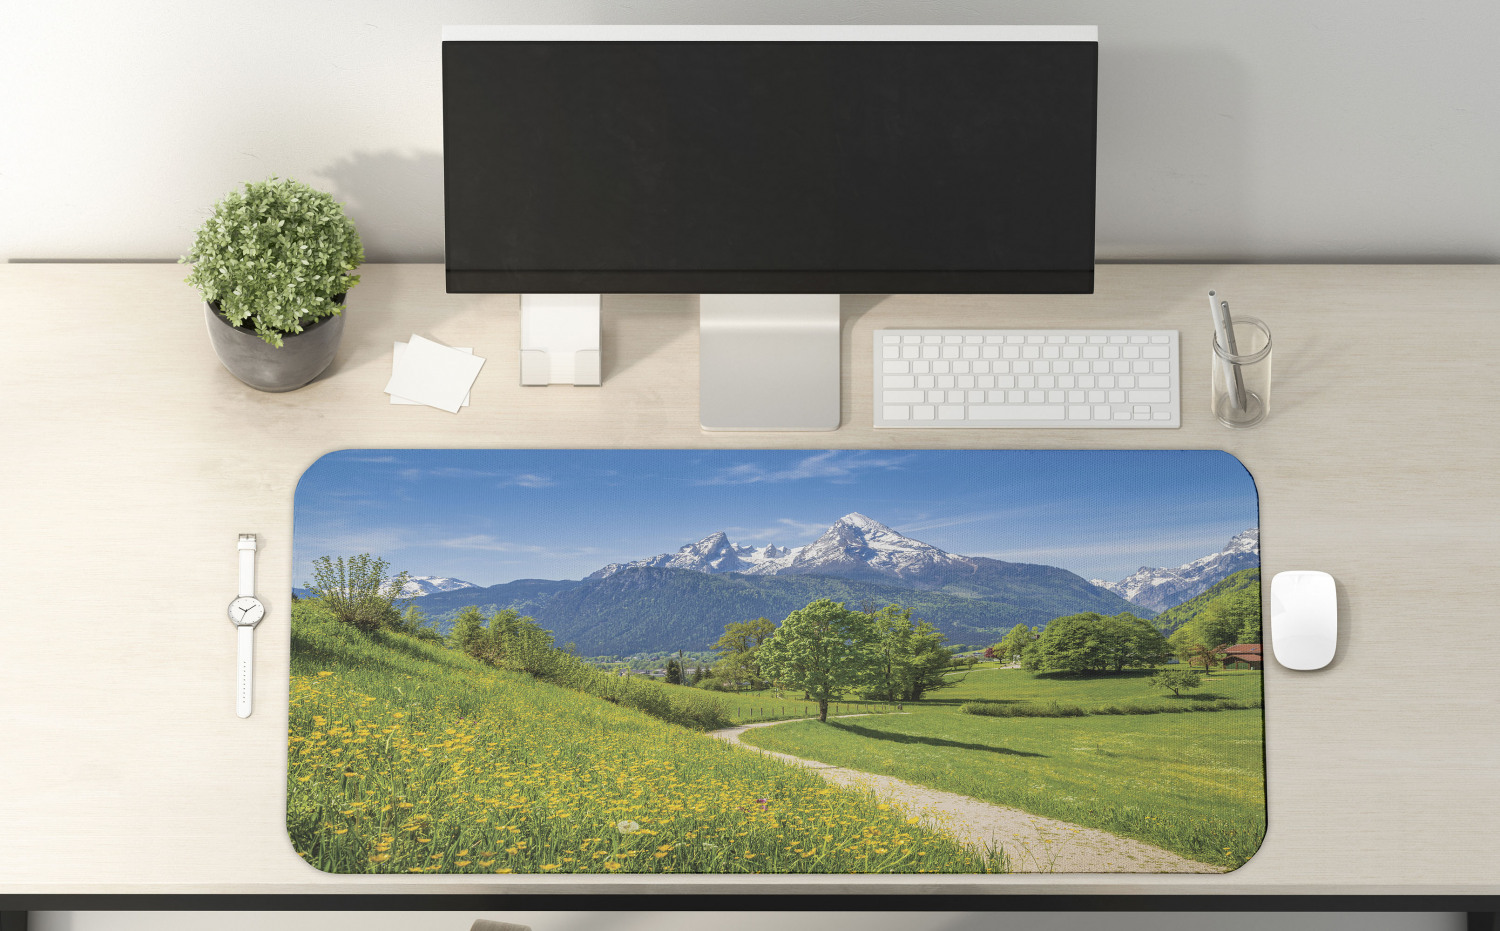 Mountain Computer Mouse Pad, Spring Scenery in Alps with Floral Grass and Snowy Mountain Tops in Rural Village, Rectangle Non-Slip Rubber Mousepad X-Large, 35" x 15", Multicolor, by Ambesonne - image 2 of 2